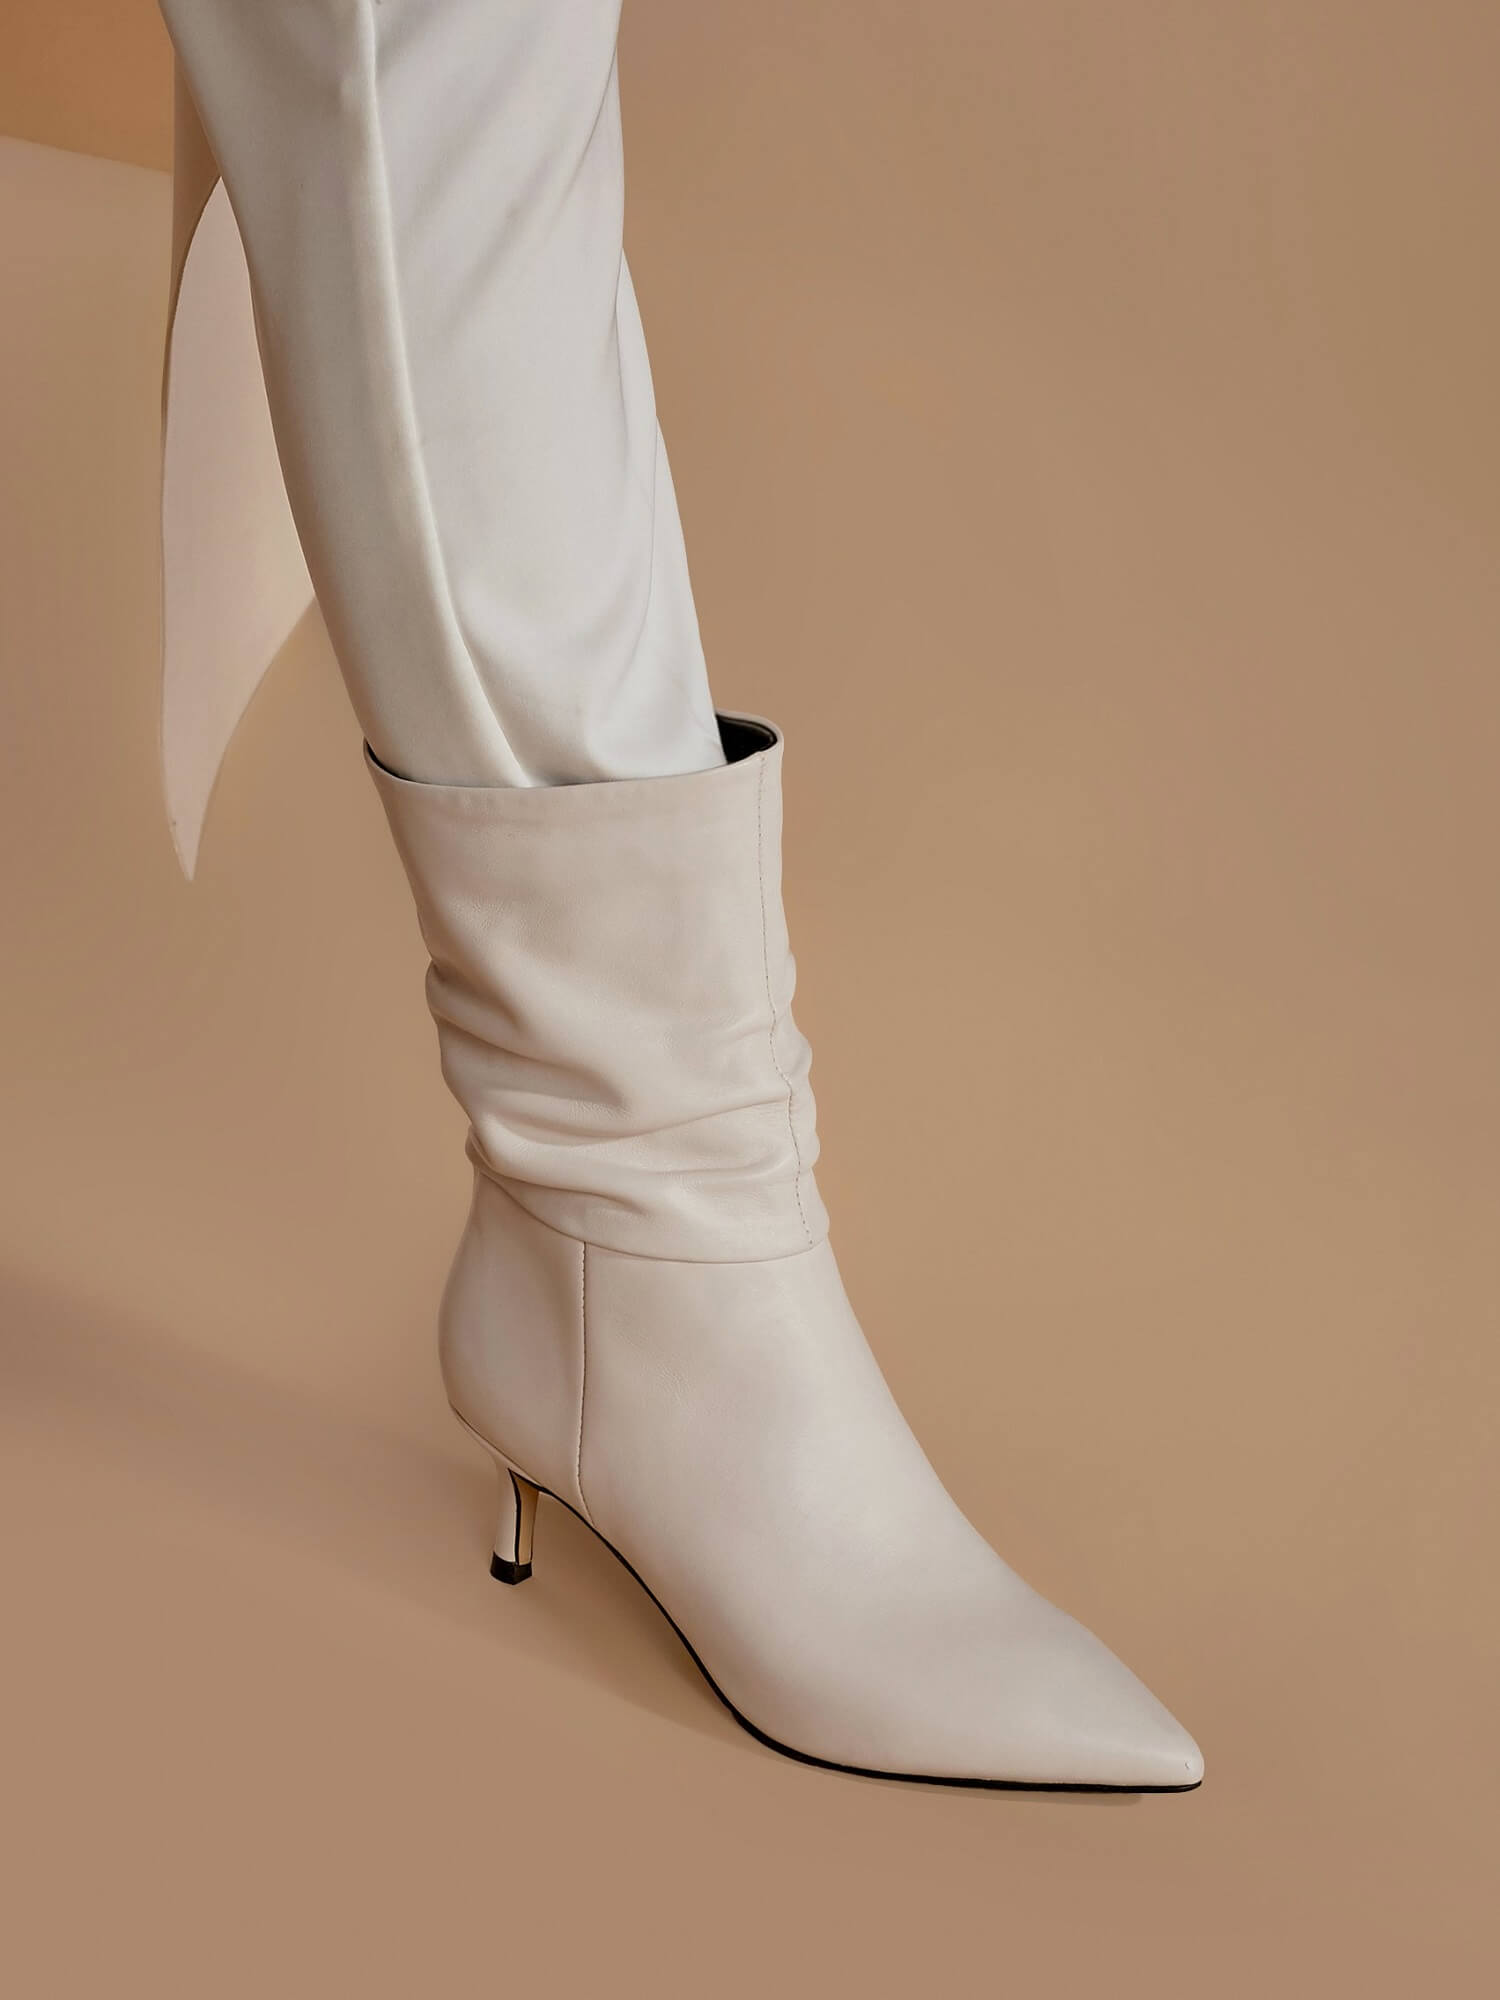 ROLISA-Milo-Slouchy-Ruched-Leather-Kitten-Heels-Mid-Calf-Boots-White-Model-5